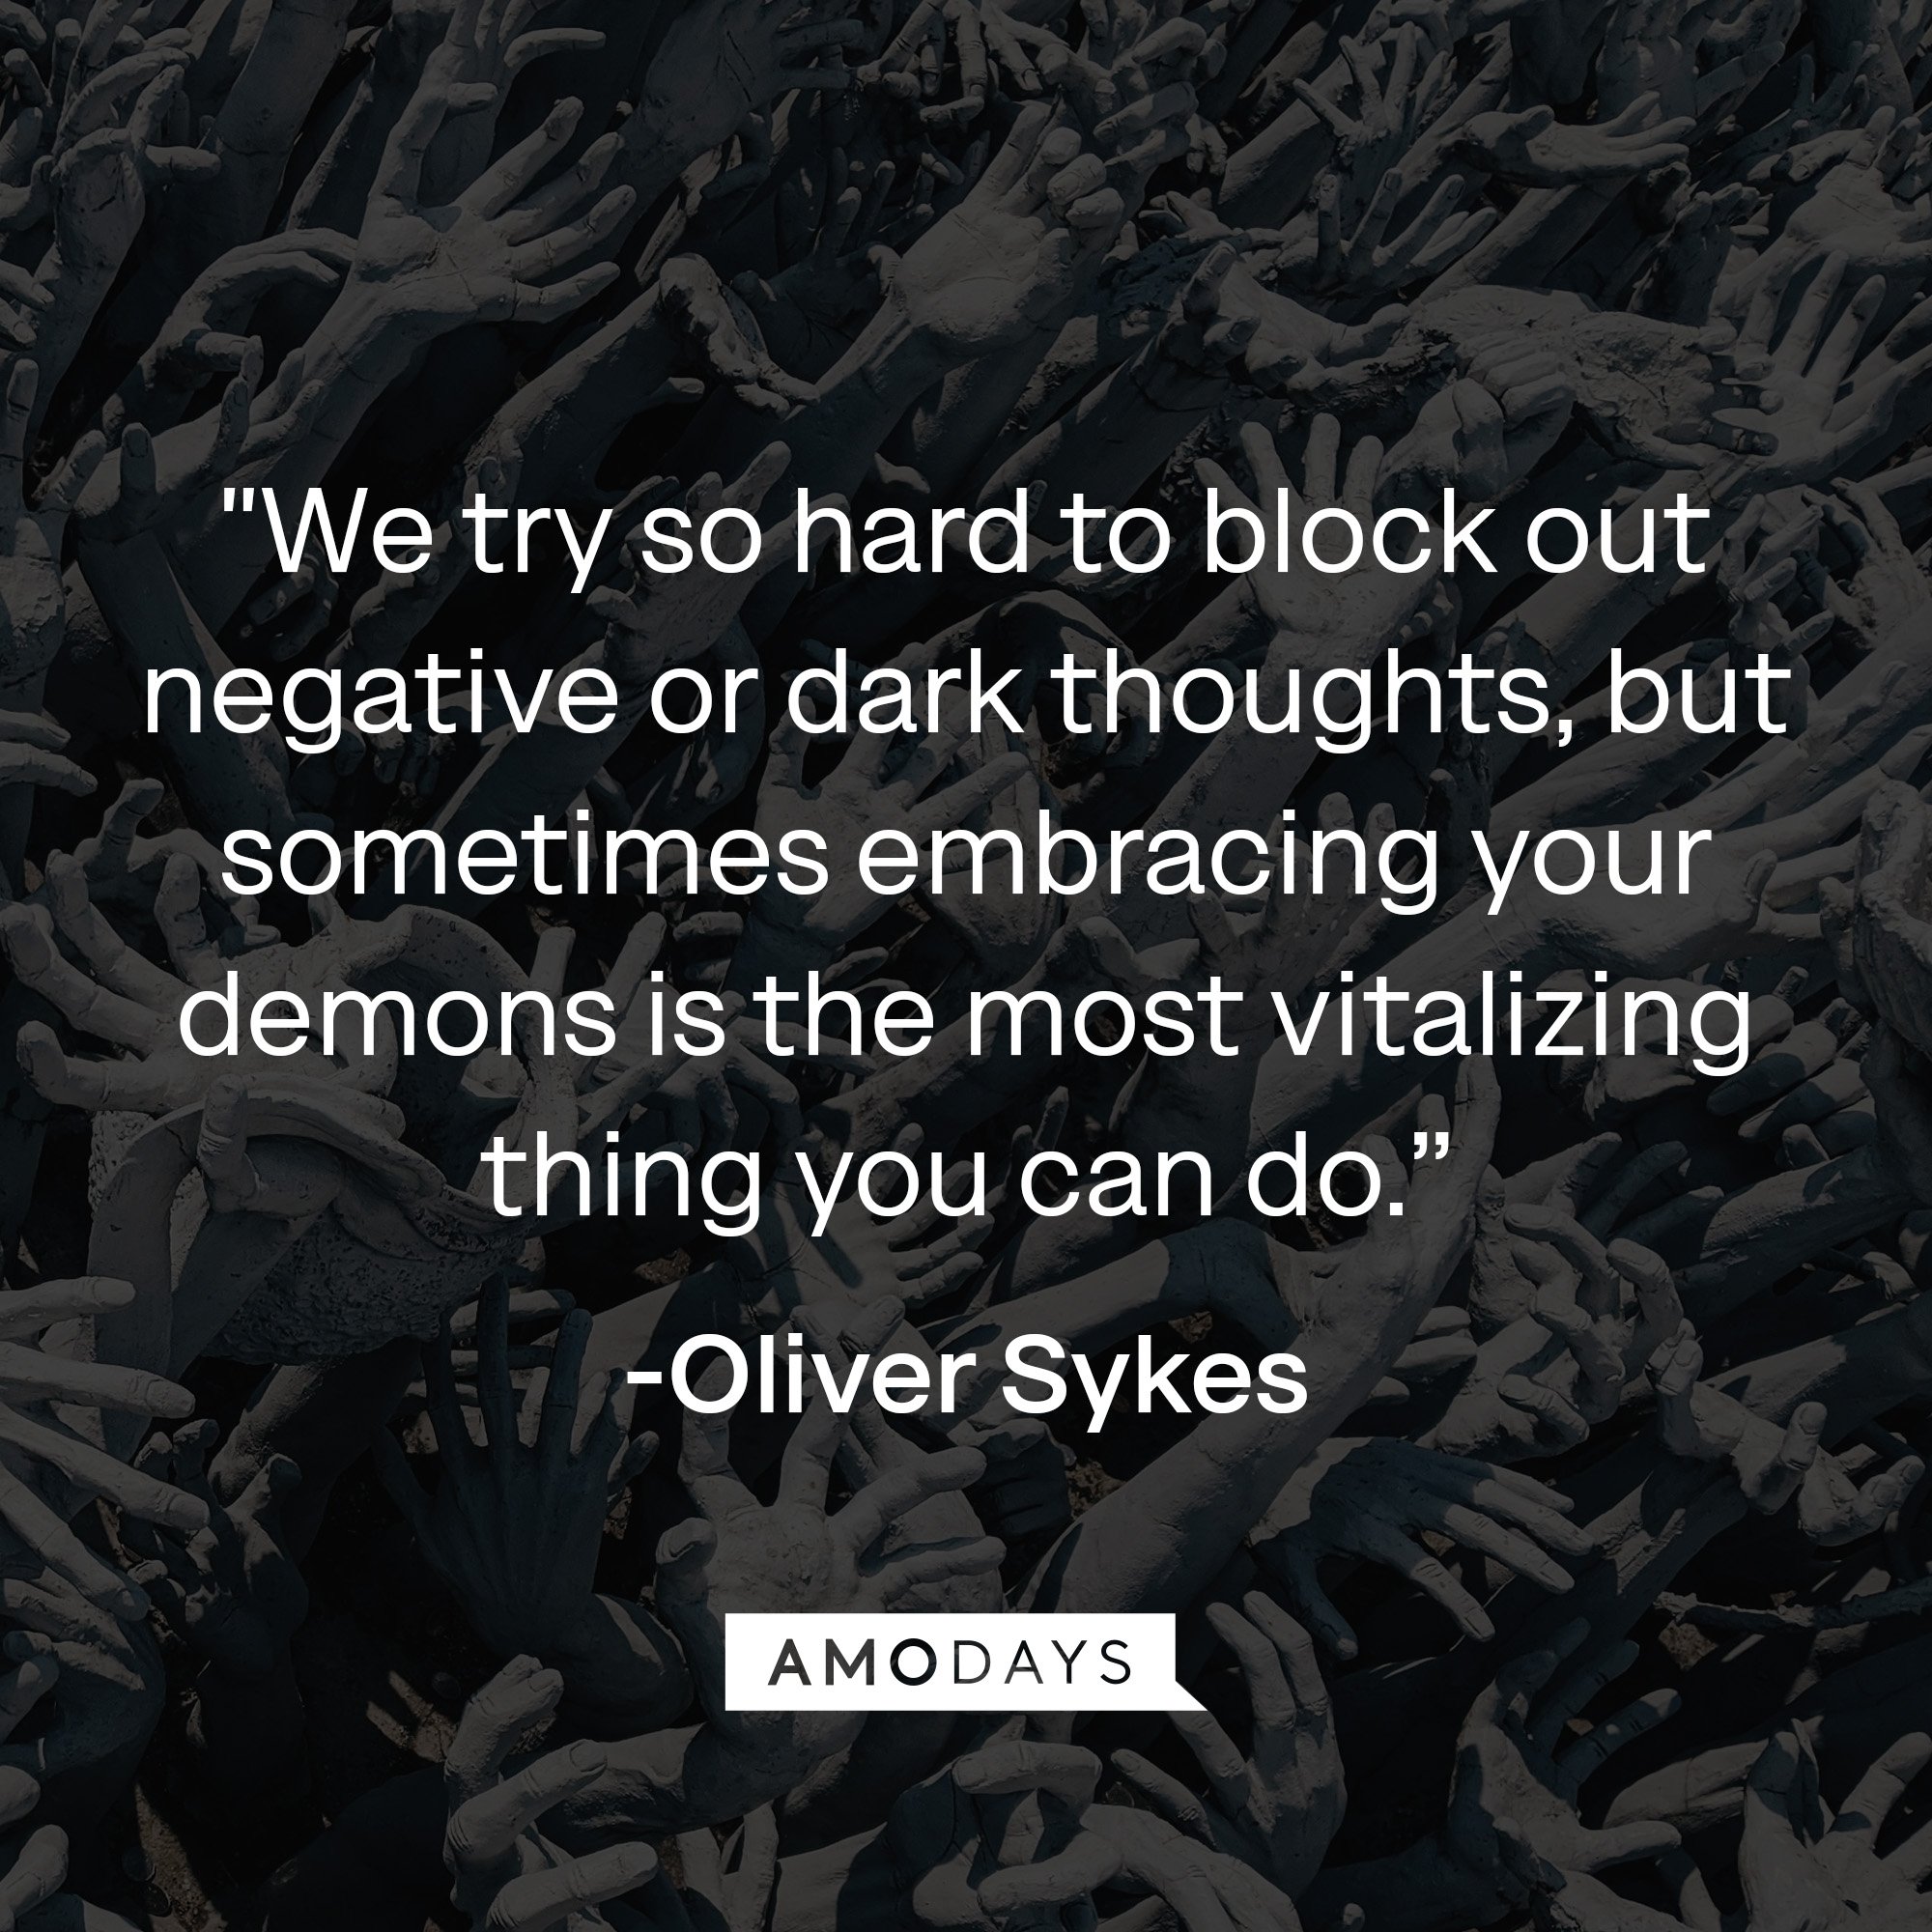 Oliver Sykes’ quote: "We try so hard to block out negative or dark thoughts, but sometimes embracing your demons is the most vitalizing thing you can do." | Image: AmoDays